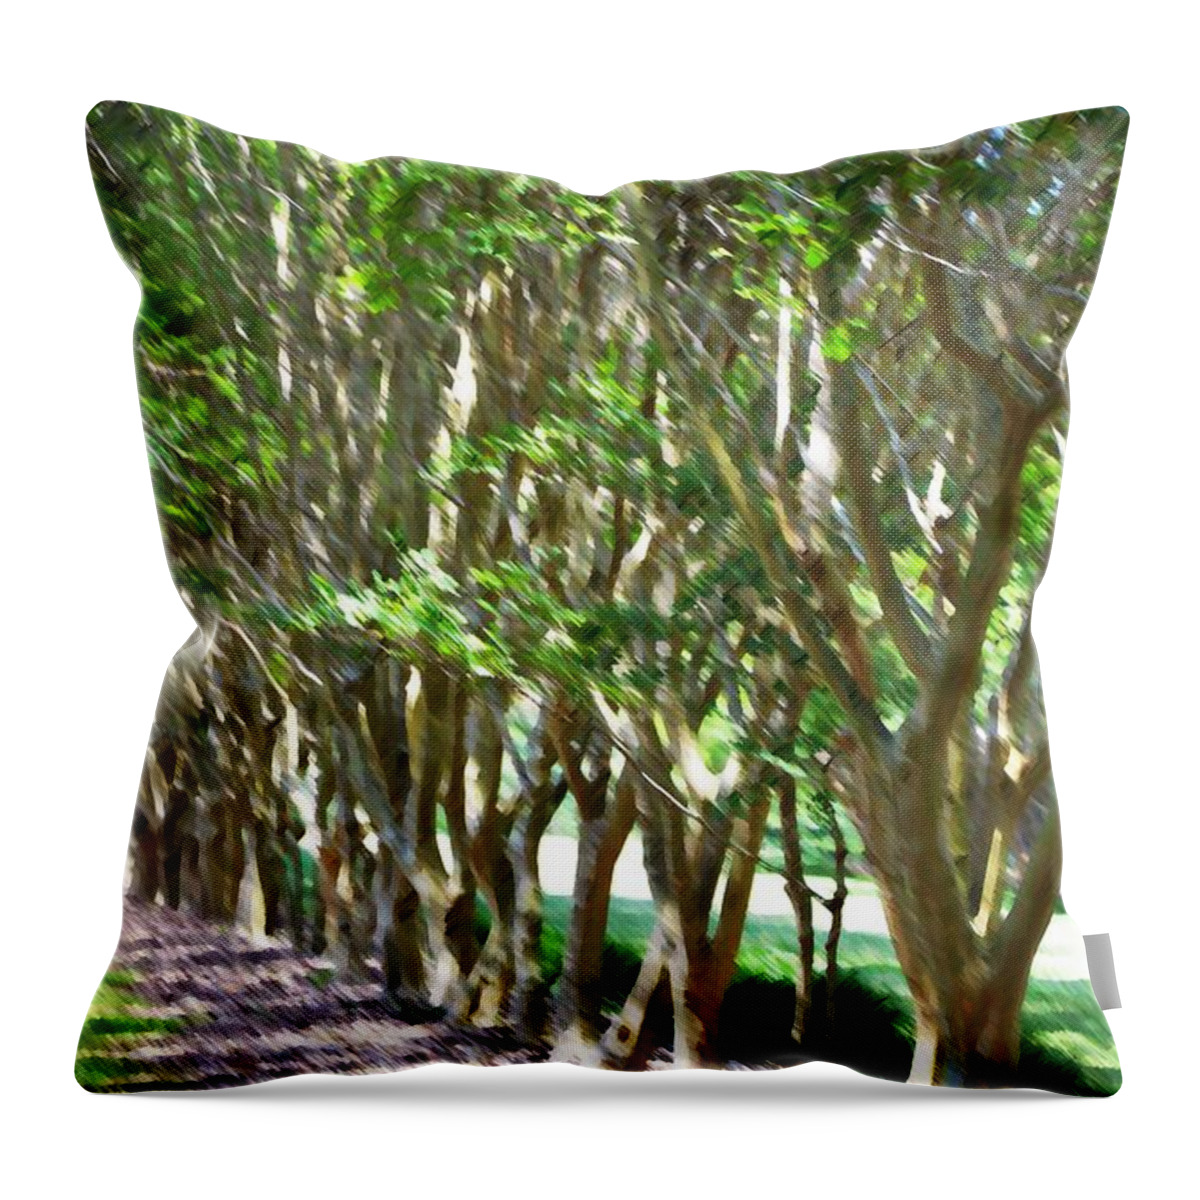 Favorite Spot In The Gardens Throw Pillow featuring the painting Norfolk Botanical Garden 5 by Jeelan Clark